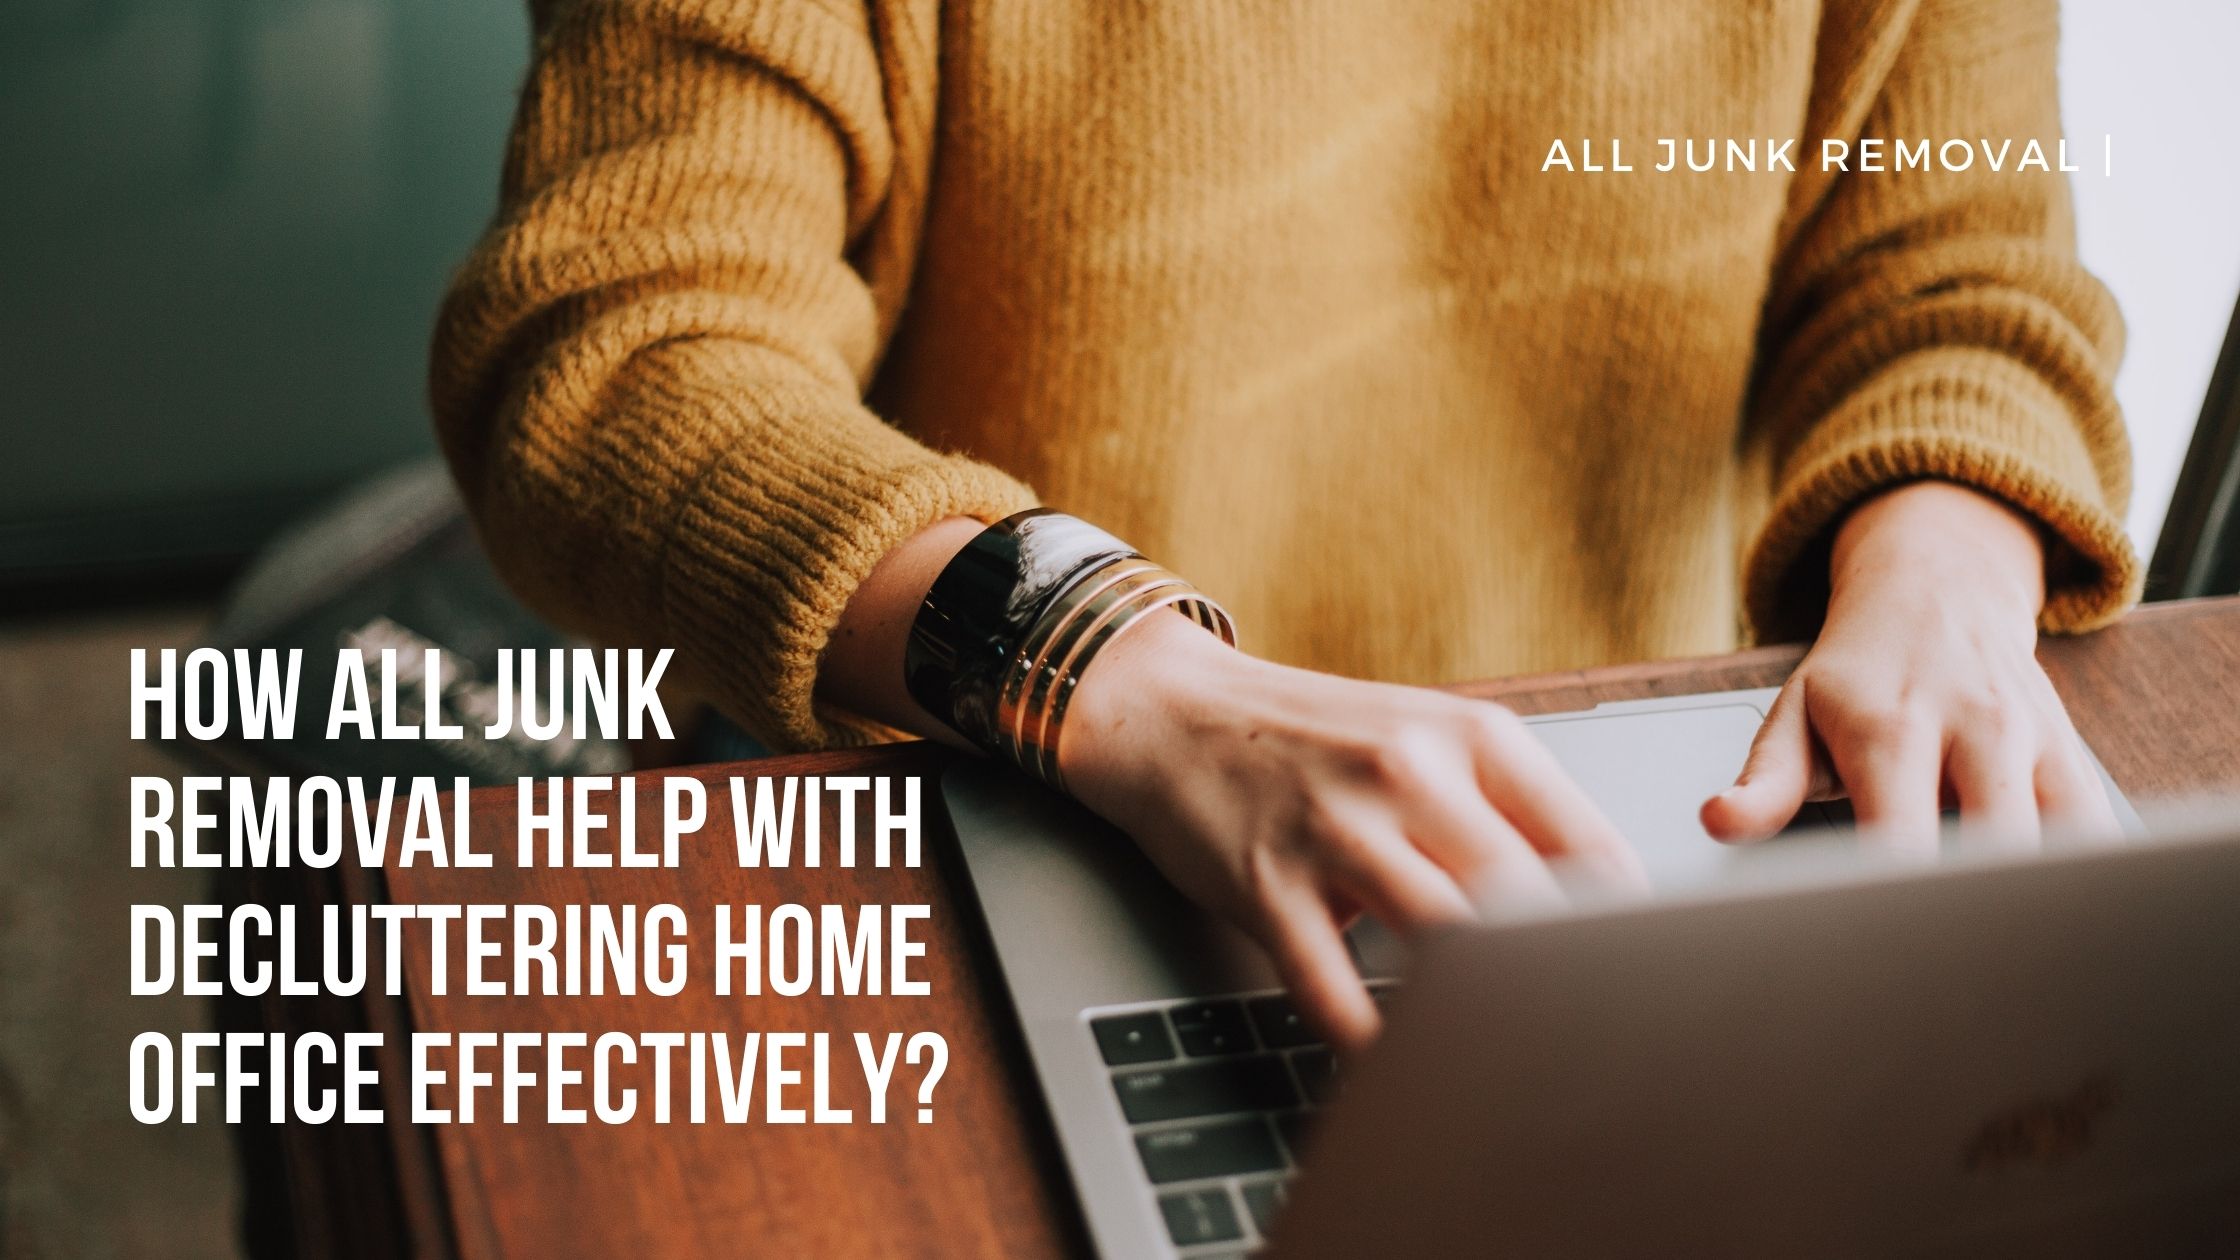 All Junk Removal Decluttering Home Office